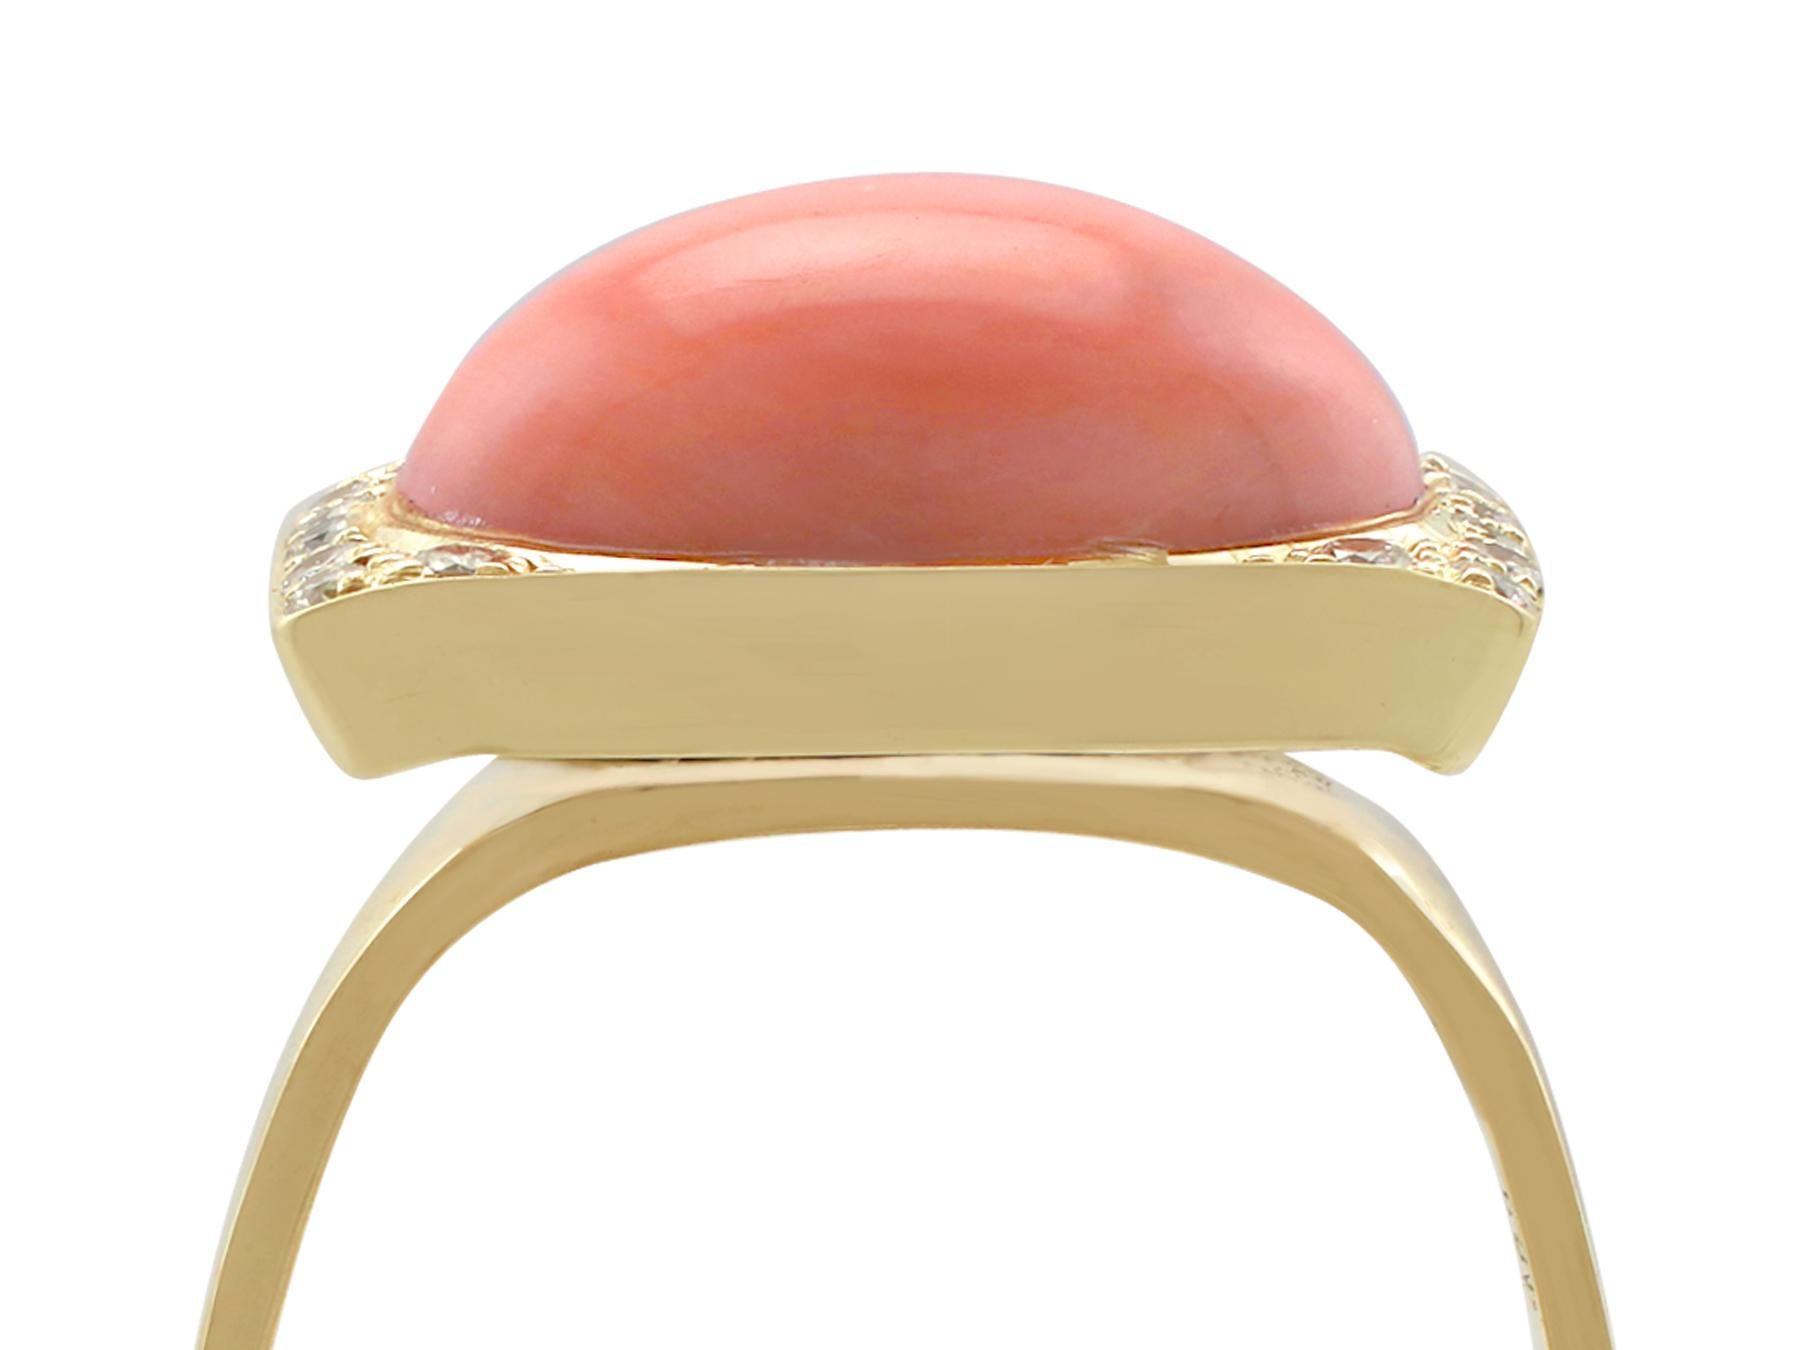 An impressive vintage 5.27 carat pink coral and 0.20 carat diamond, 14 karat yellow gold dress ring; part of our diverse gemstone jewellery and estate jewelry collections.

This fine and impressive pink coral and diamond ring has been crafted in 14k